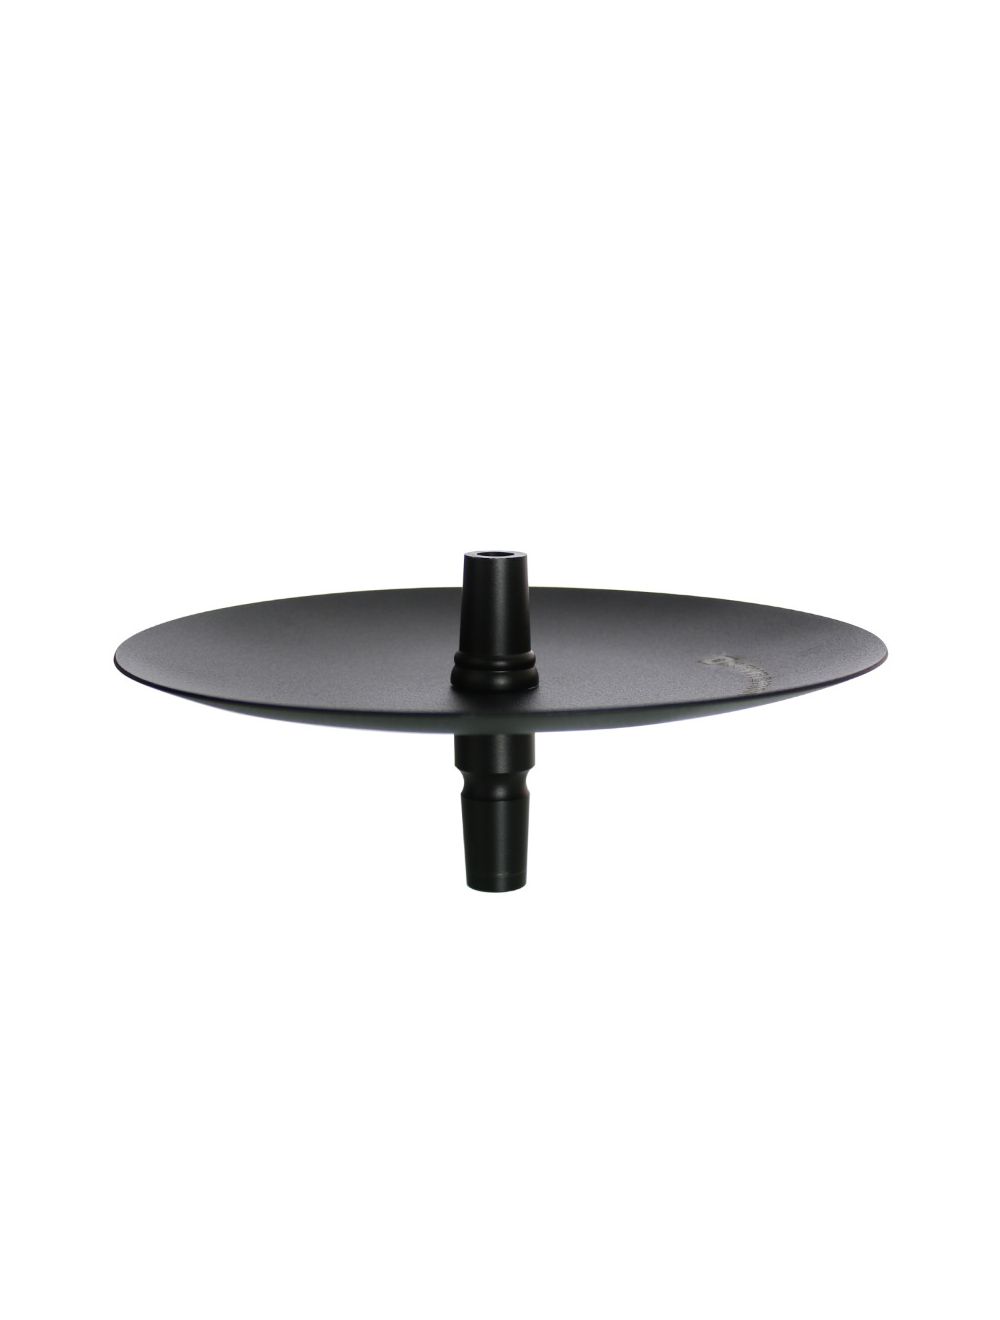 ELOX Bowl-Adapter Ash-Plate SET, black, with 18.8 Cut-Connection